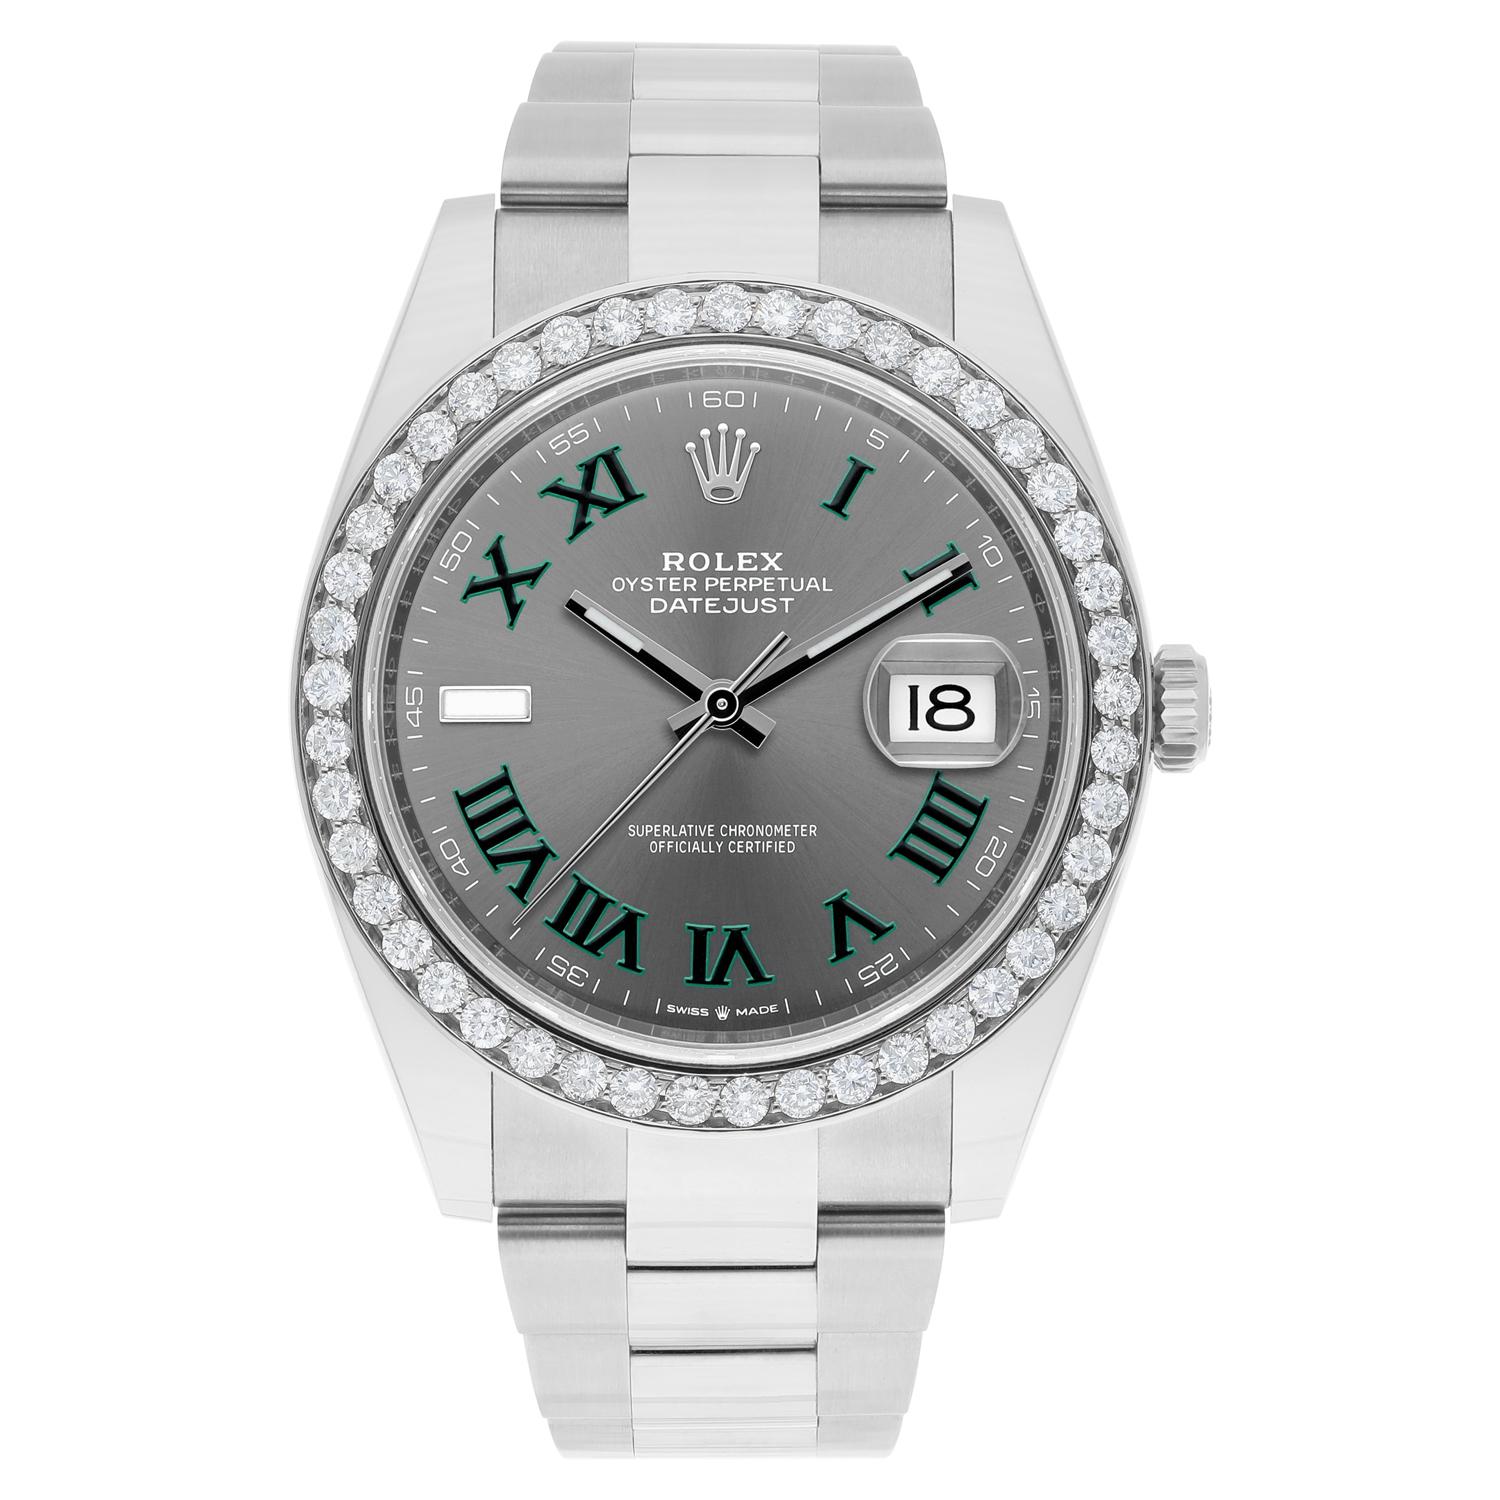 This magnificent Rolex Datejust wristwatch is a true masterpiece of Swiss craftsmanship. With its exquisite Wimbledon Dial and elegant Roman numerals, it is the epitome of luxury and style. The 41mm stainless steel case and custom diamond bezel with